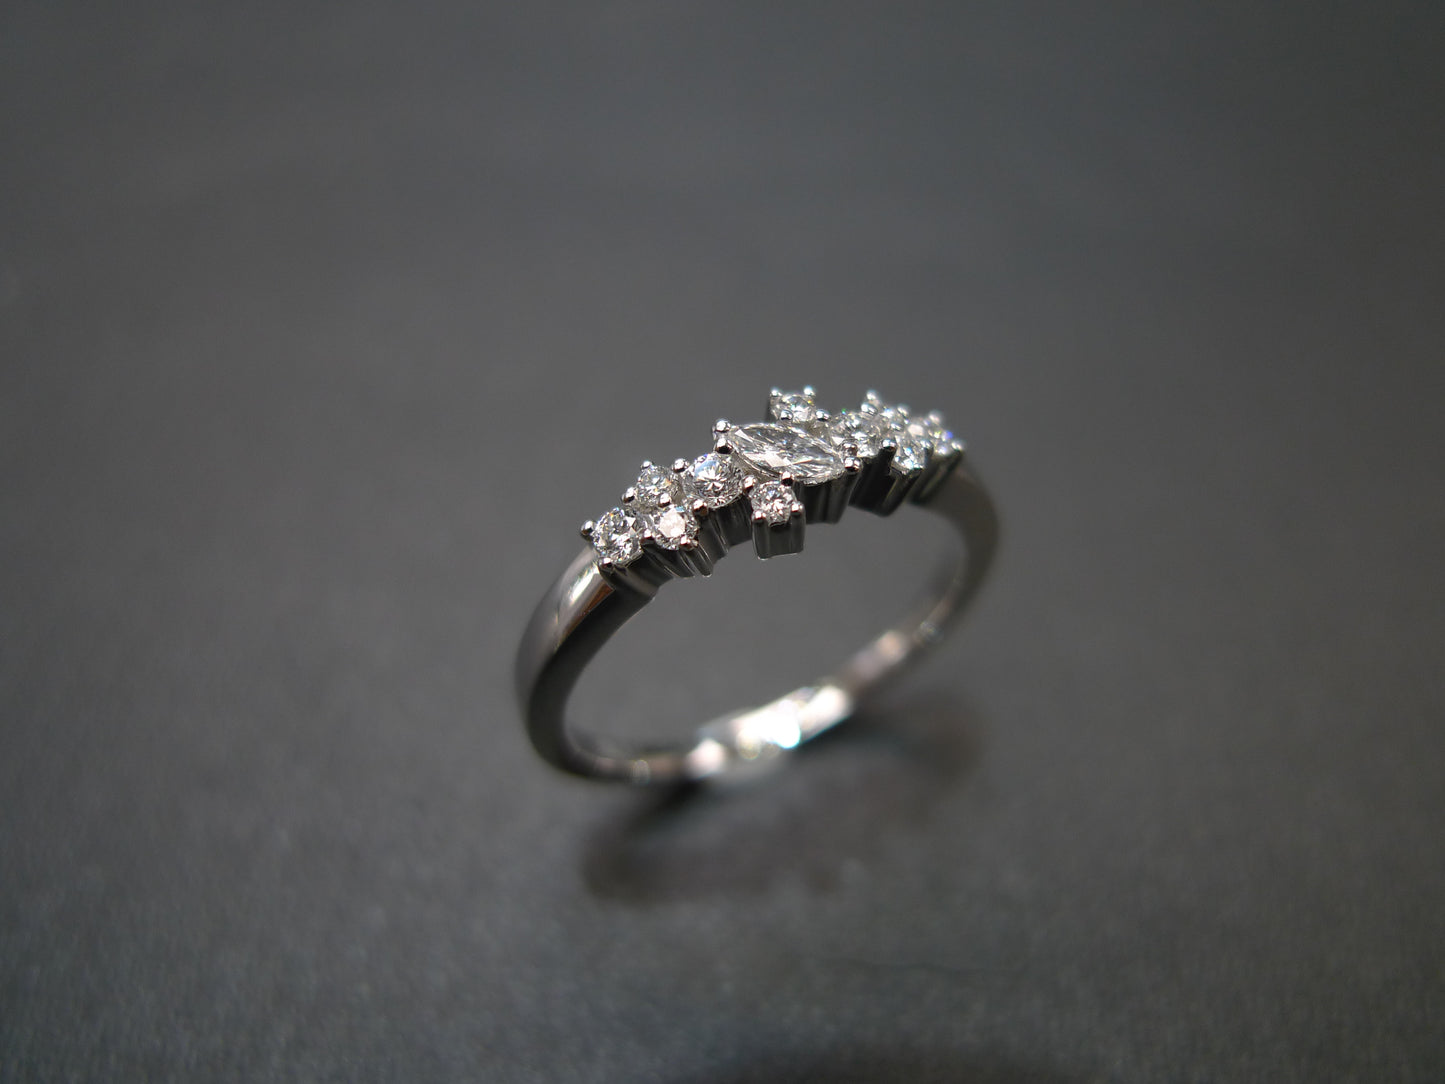 Marquise Diamond Ring in 14K White Gold - HN JEWELRY